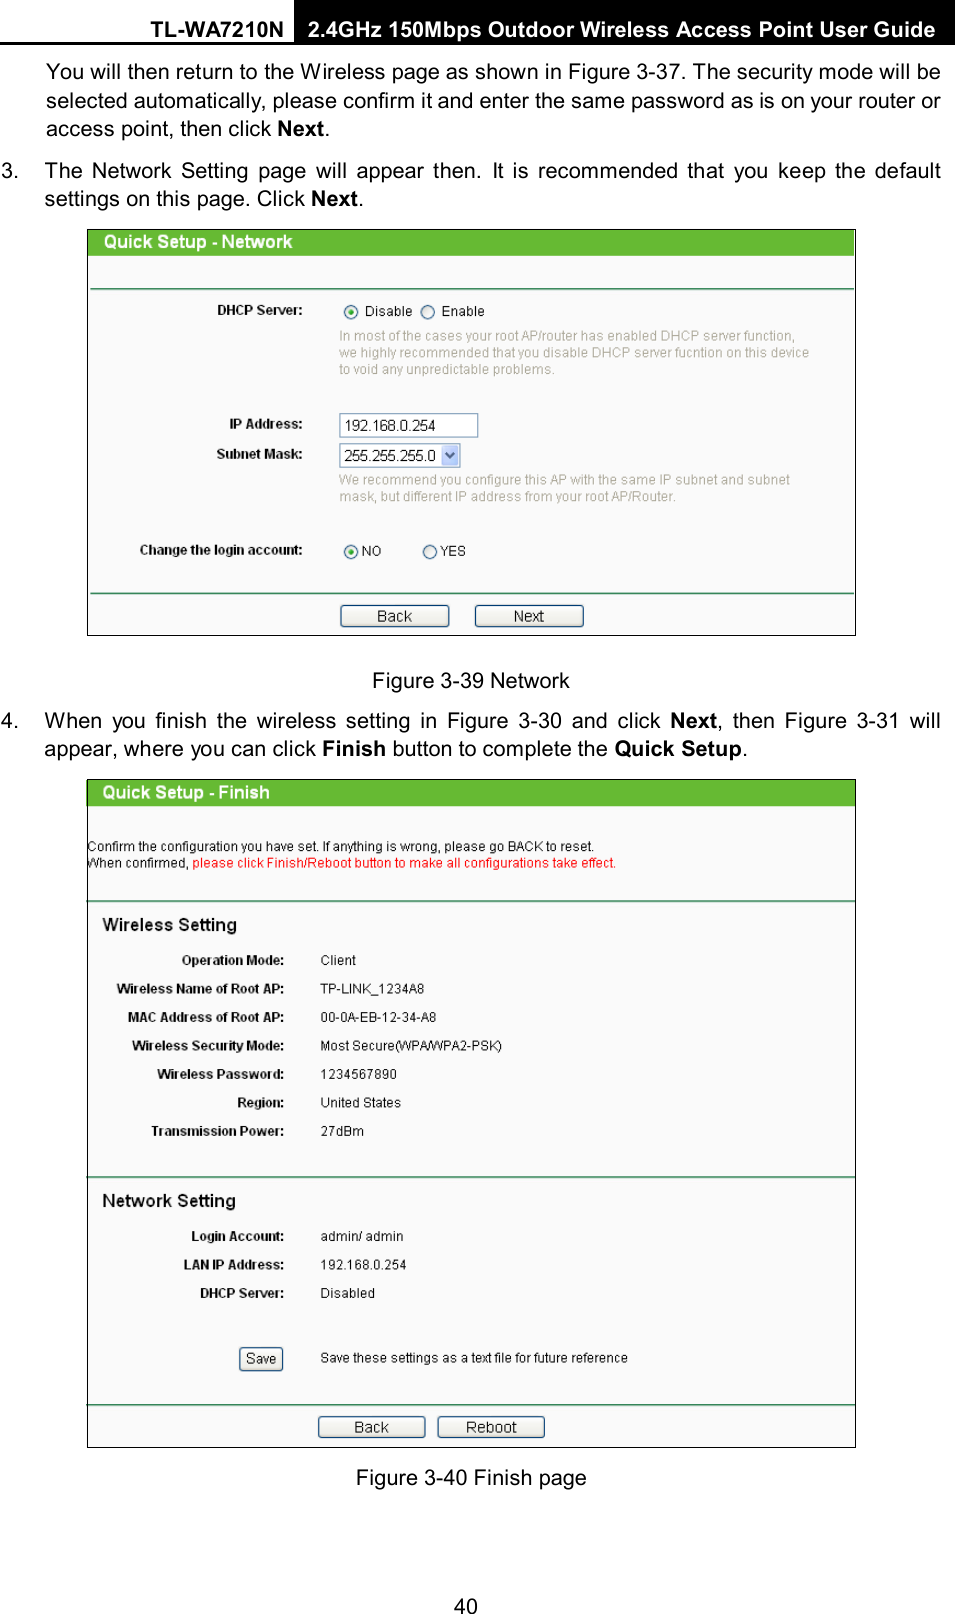 TL-WA7210N 2.4GHz 150Mbps Outdoor Wireless Access Point User Guide  40You will then return to the Wireless page as shown in Figure 3-37. The security mode will be selected automatically, please confirm it and enter the same password as is on your router or access point, then click Next. 3. The Network Setting page will appear then. It is recommended that you keep the default settings on this page. Click Next.  Figure 3-39 Network 4. When you finish the wireless setting in Figure  3-30 and click Next, then Figure  3-31 will appear, where you can click Finish button to complete the Quick Setup.  Figure 3-40 Finish page  